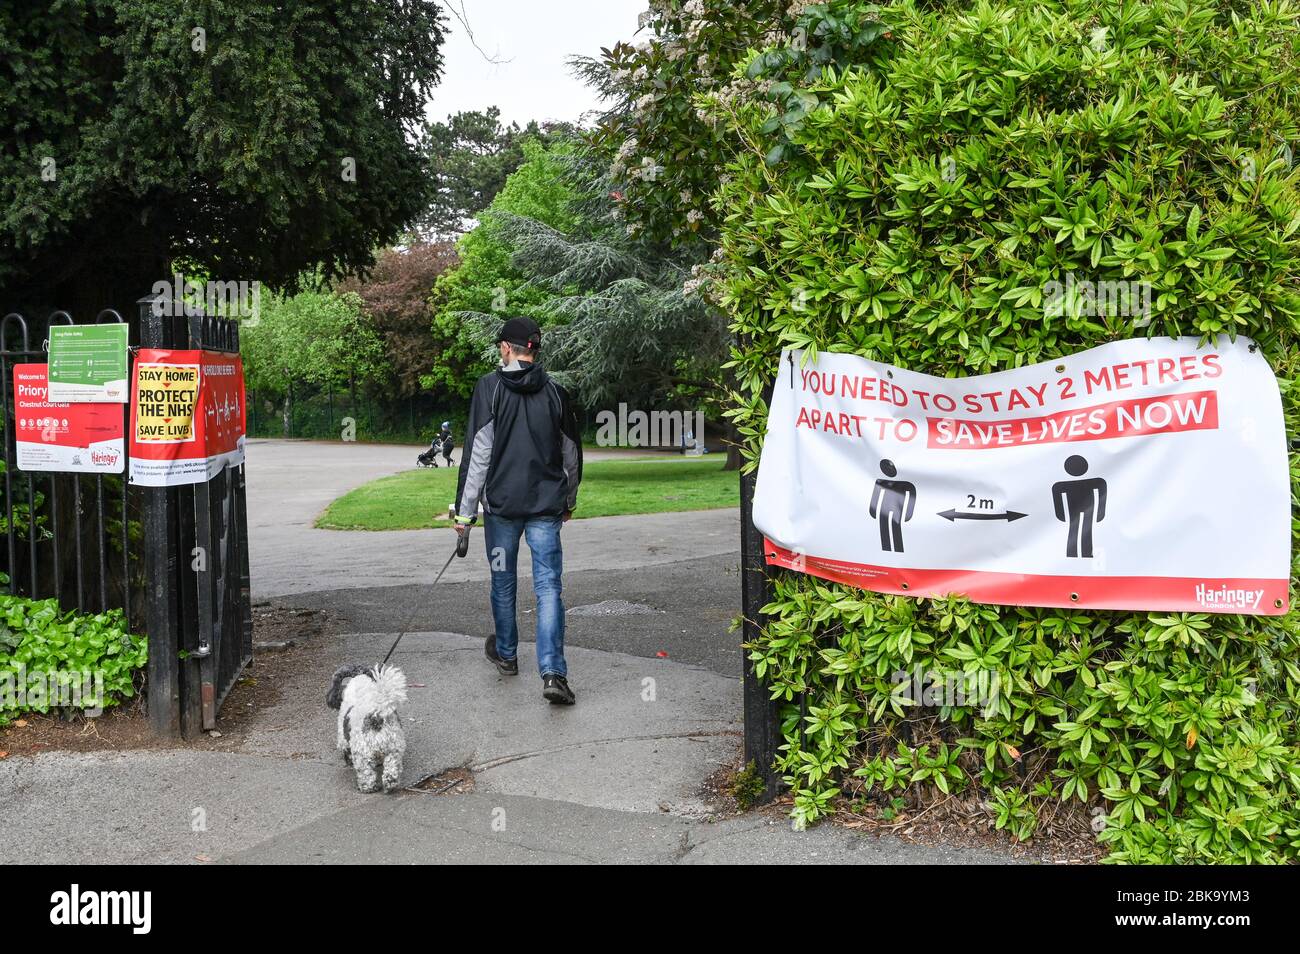 A man walking a dog through park gates in London with notices 'Stay home, protect the `NHS' and 'You need to stay 2 meters apart, save lives now' Stock Photo